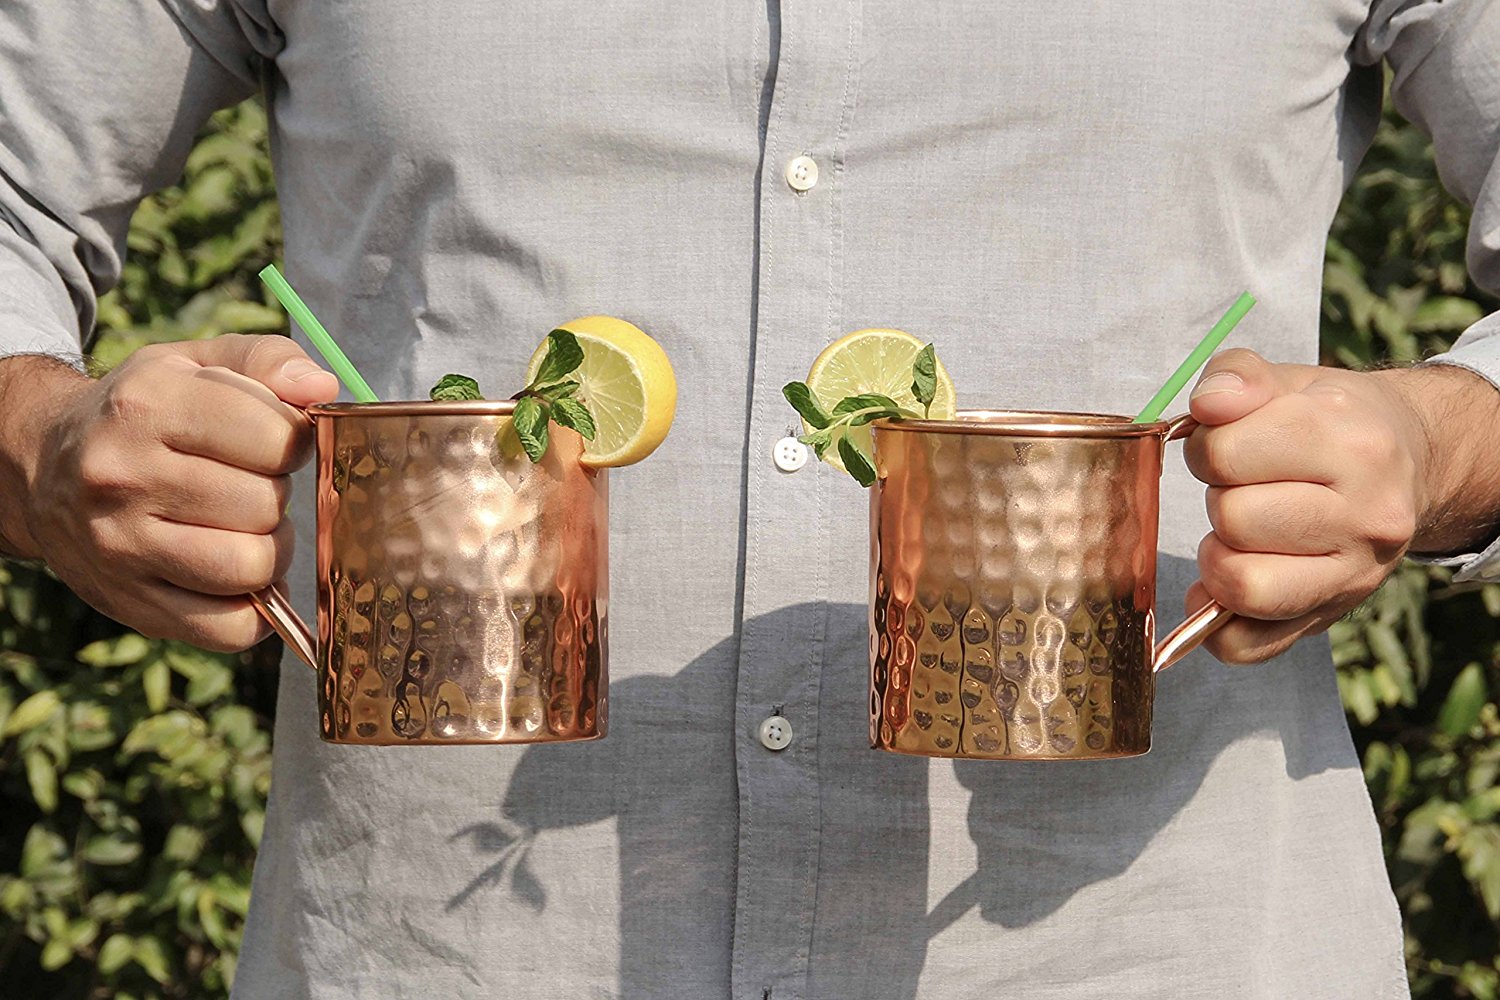 Premium Moscow Mule Hammered Copper Mugs, Set of 2—$16.00!